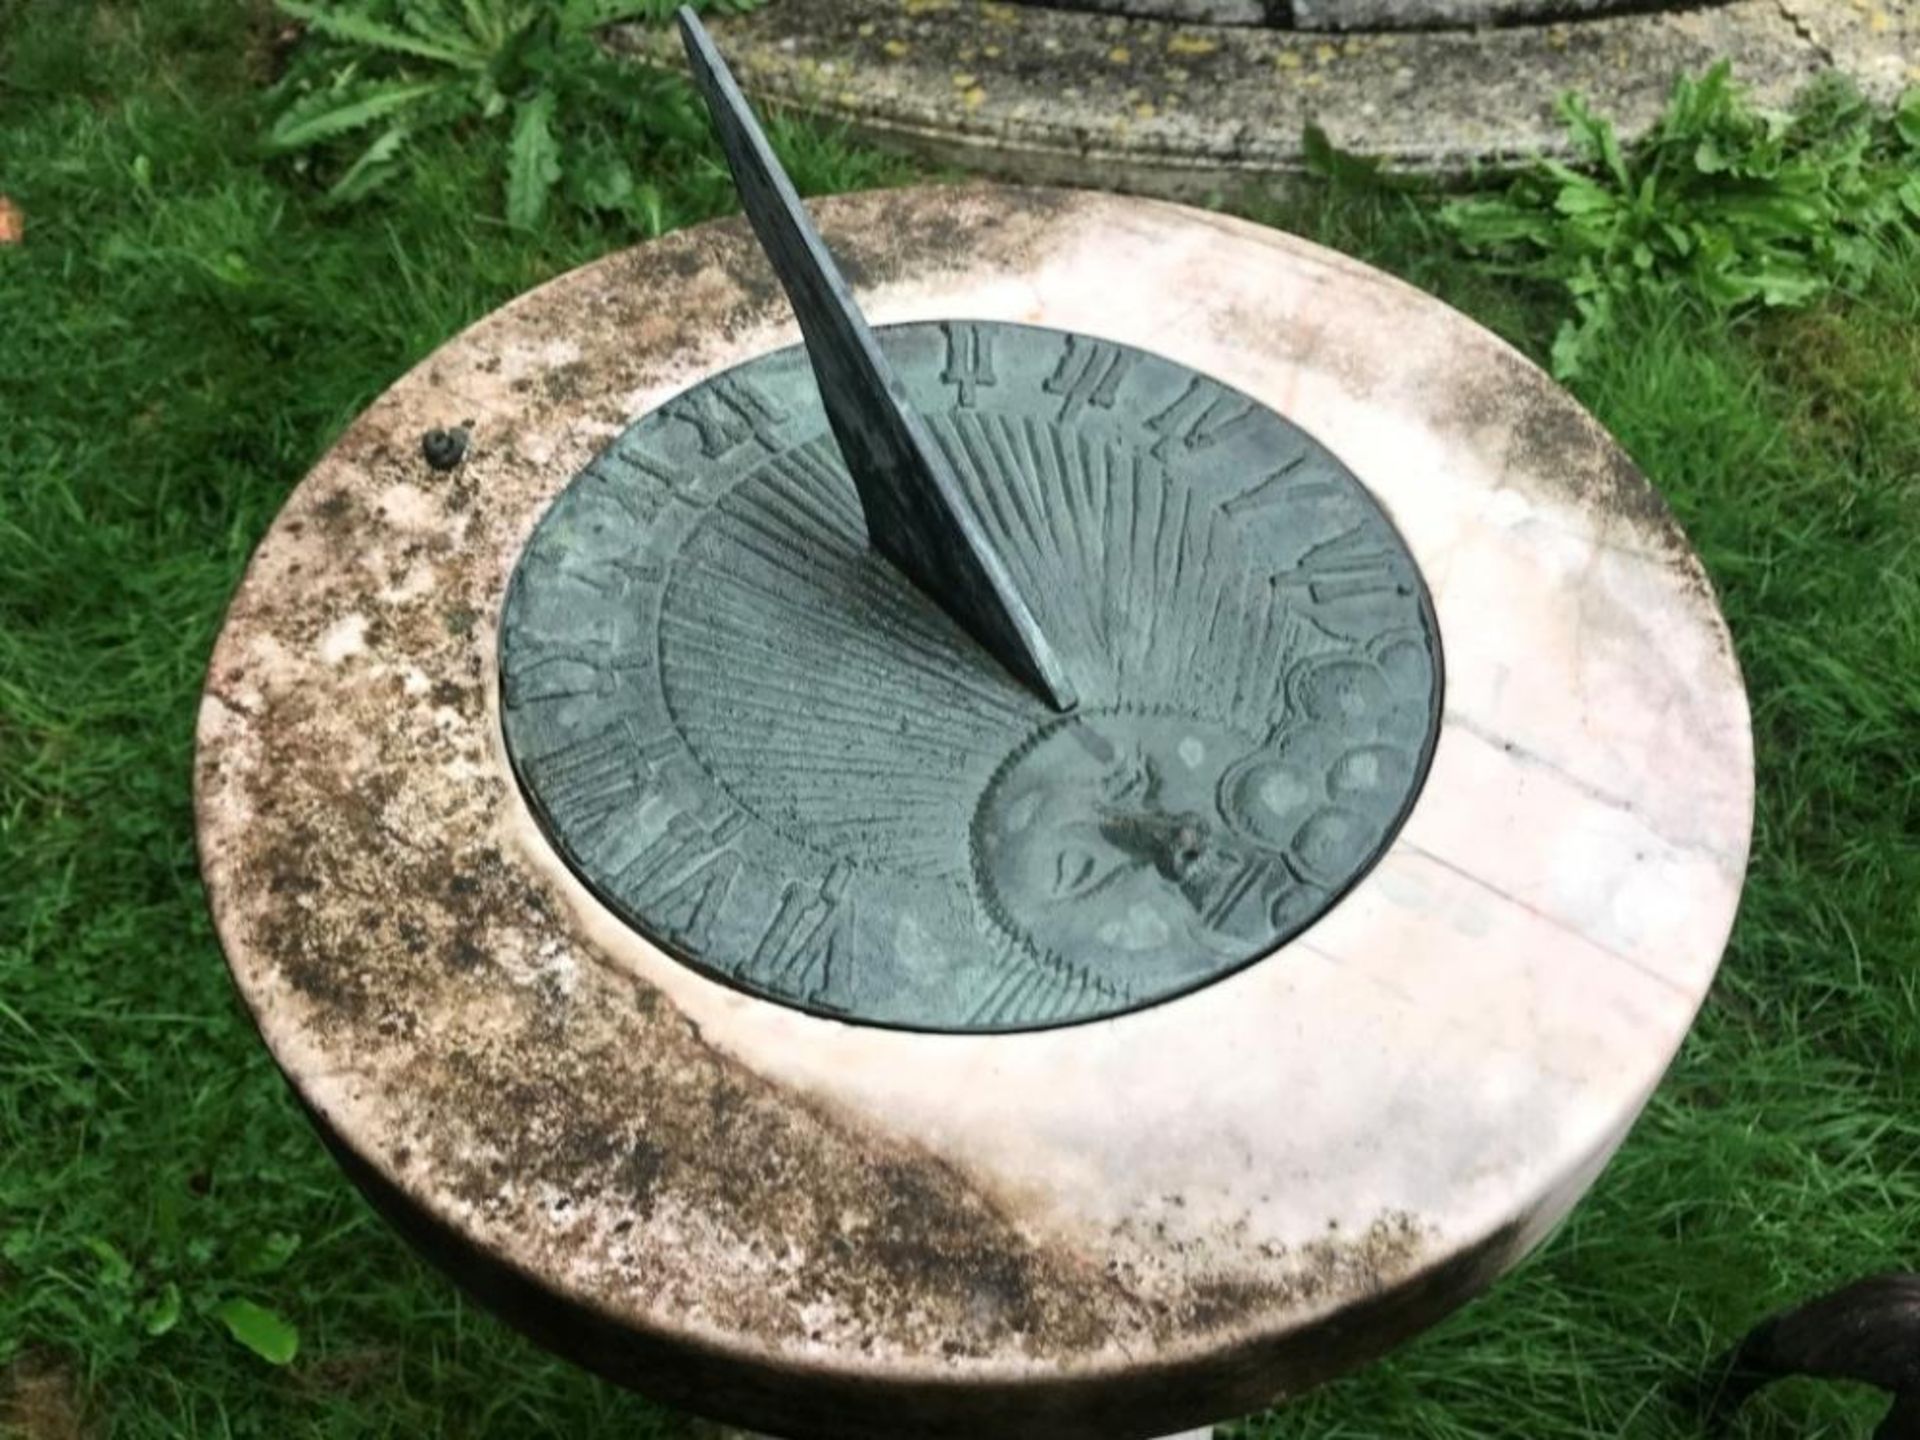 1 x Solstice Stone Sundial Shaped Pedestal With Dial Plate - Measurements Height 84cm x Diameter - Image 3 of 8